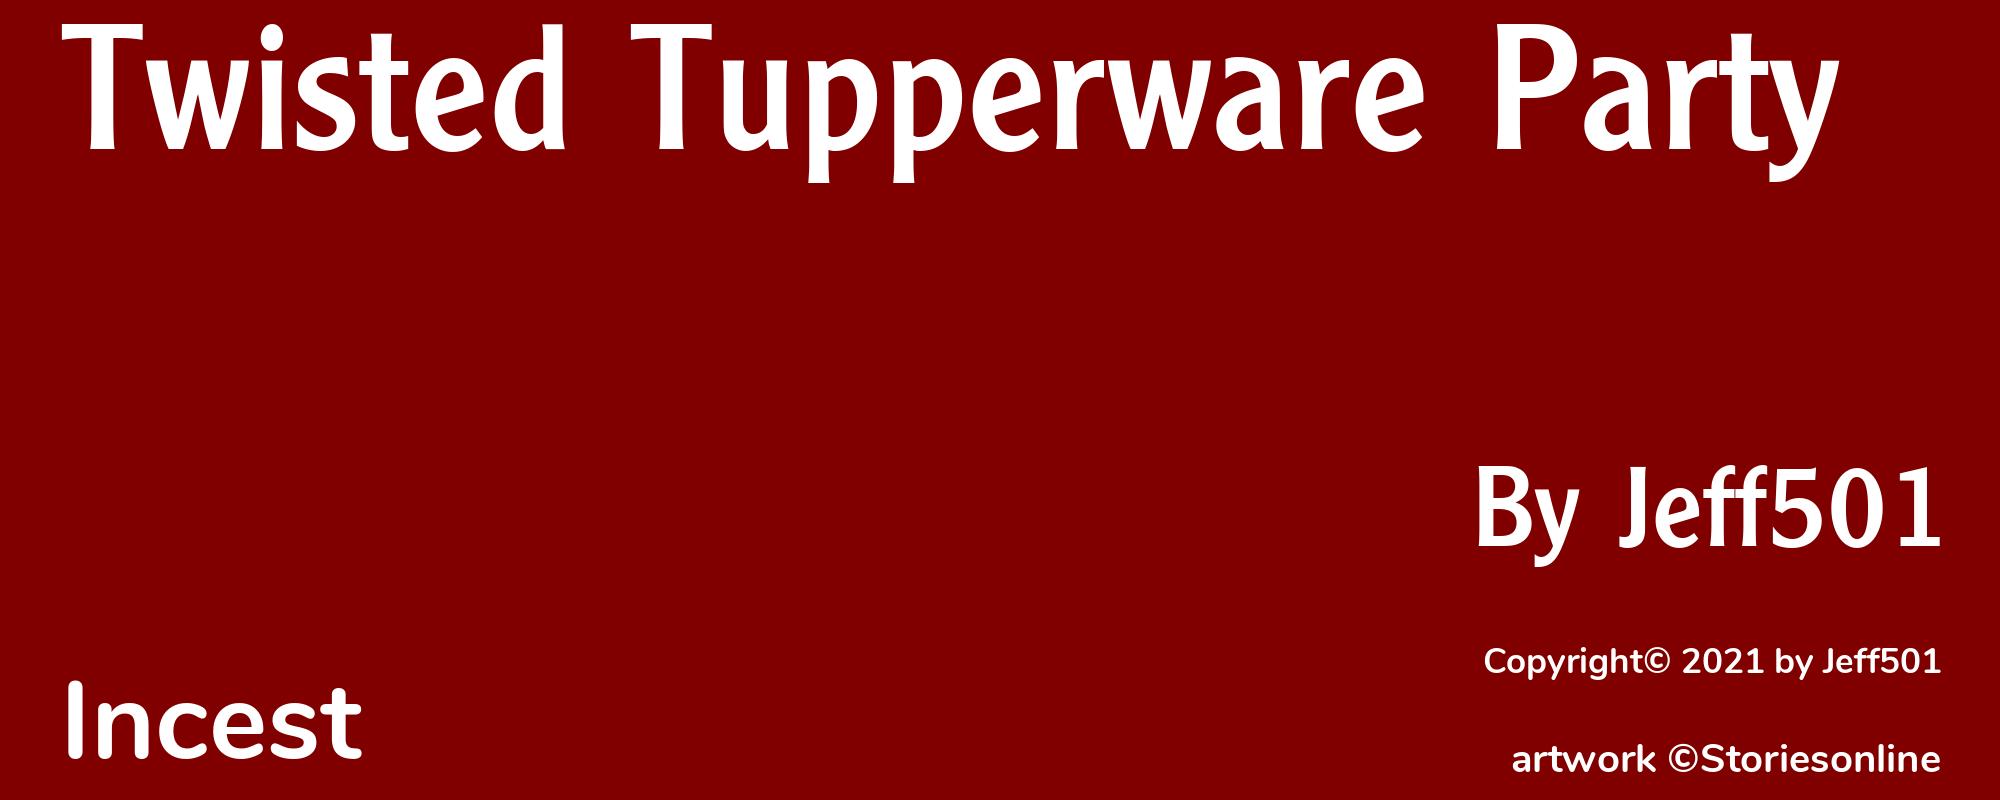 Twisted Tupperware Party - Cover